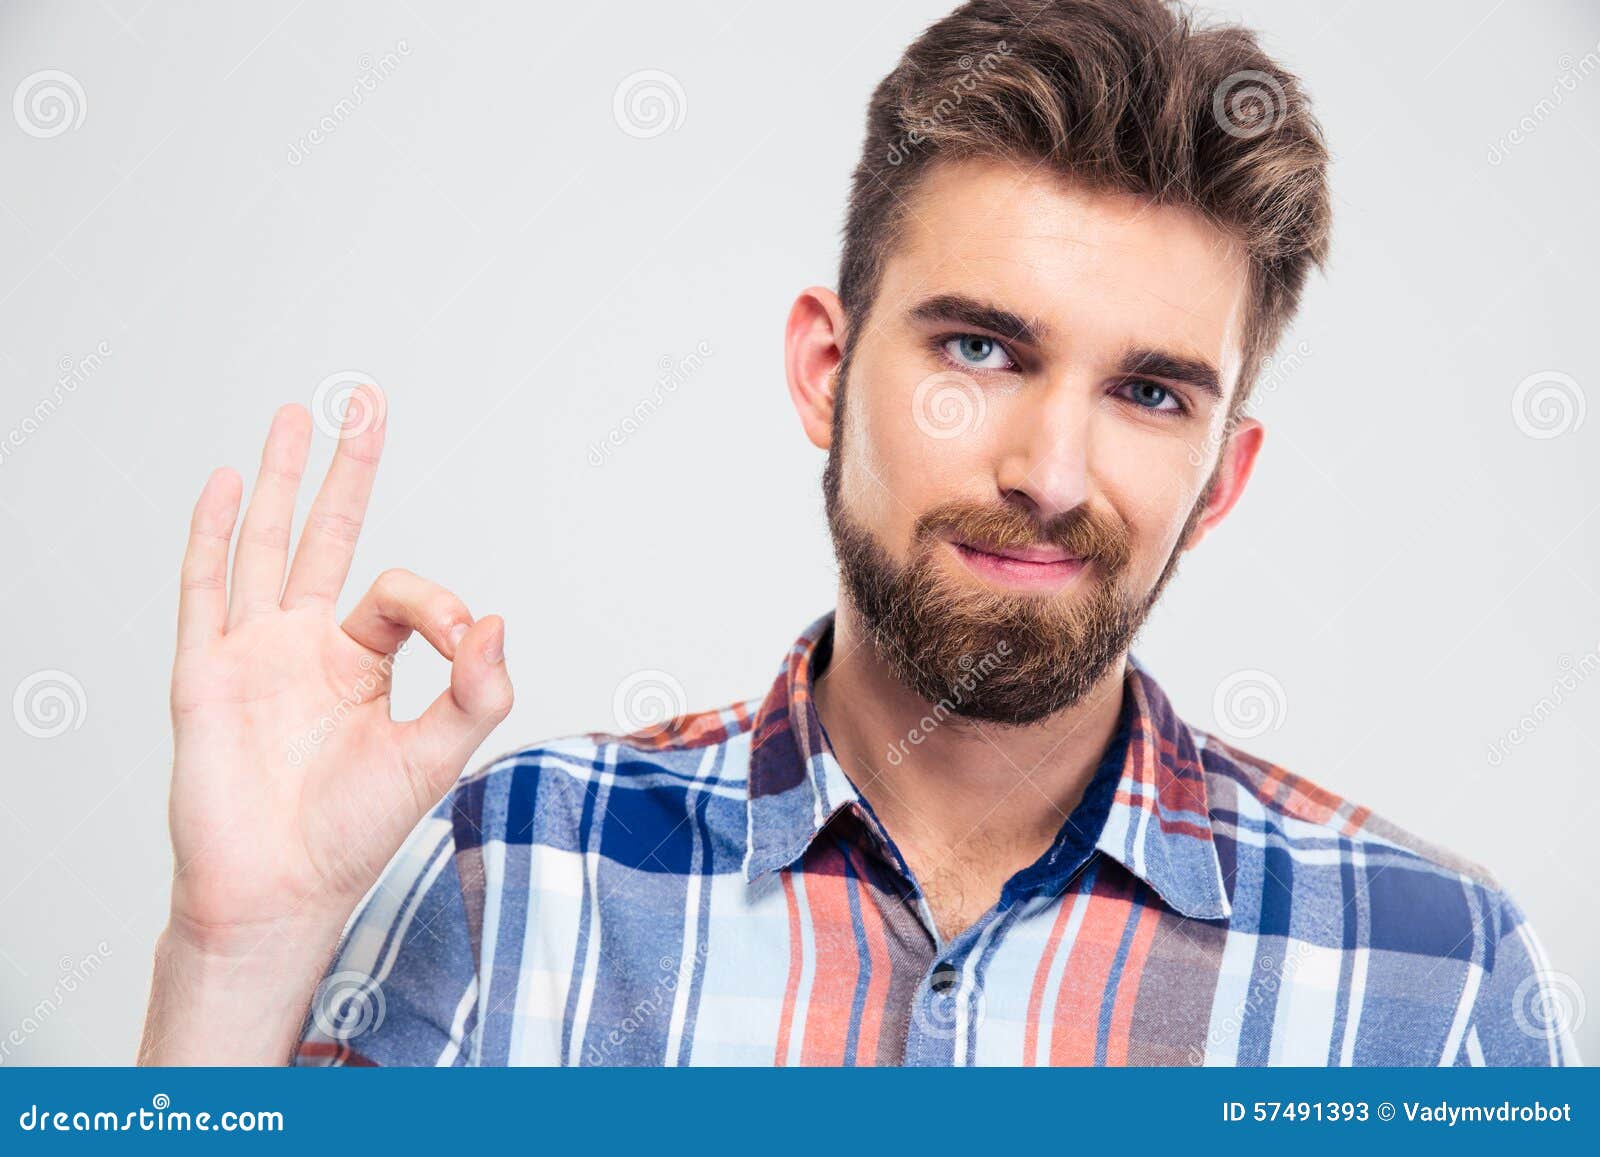 Happy Man Showing Ok Sign with Fingers Stock Image - Image of finger ...